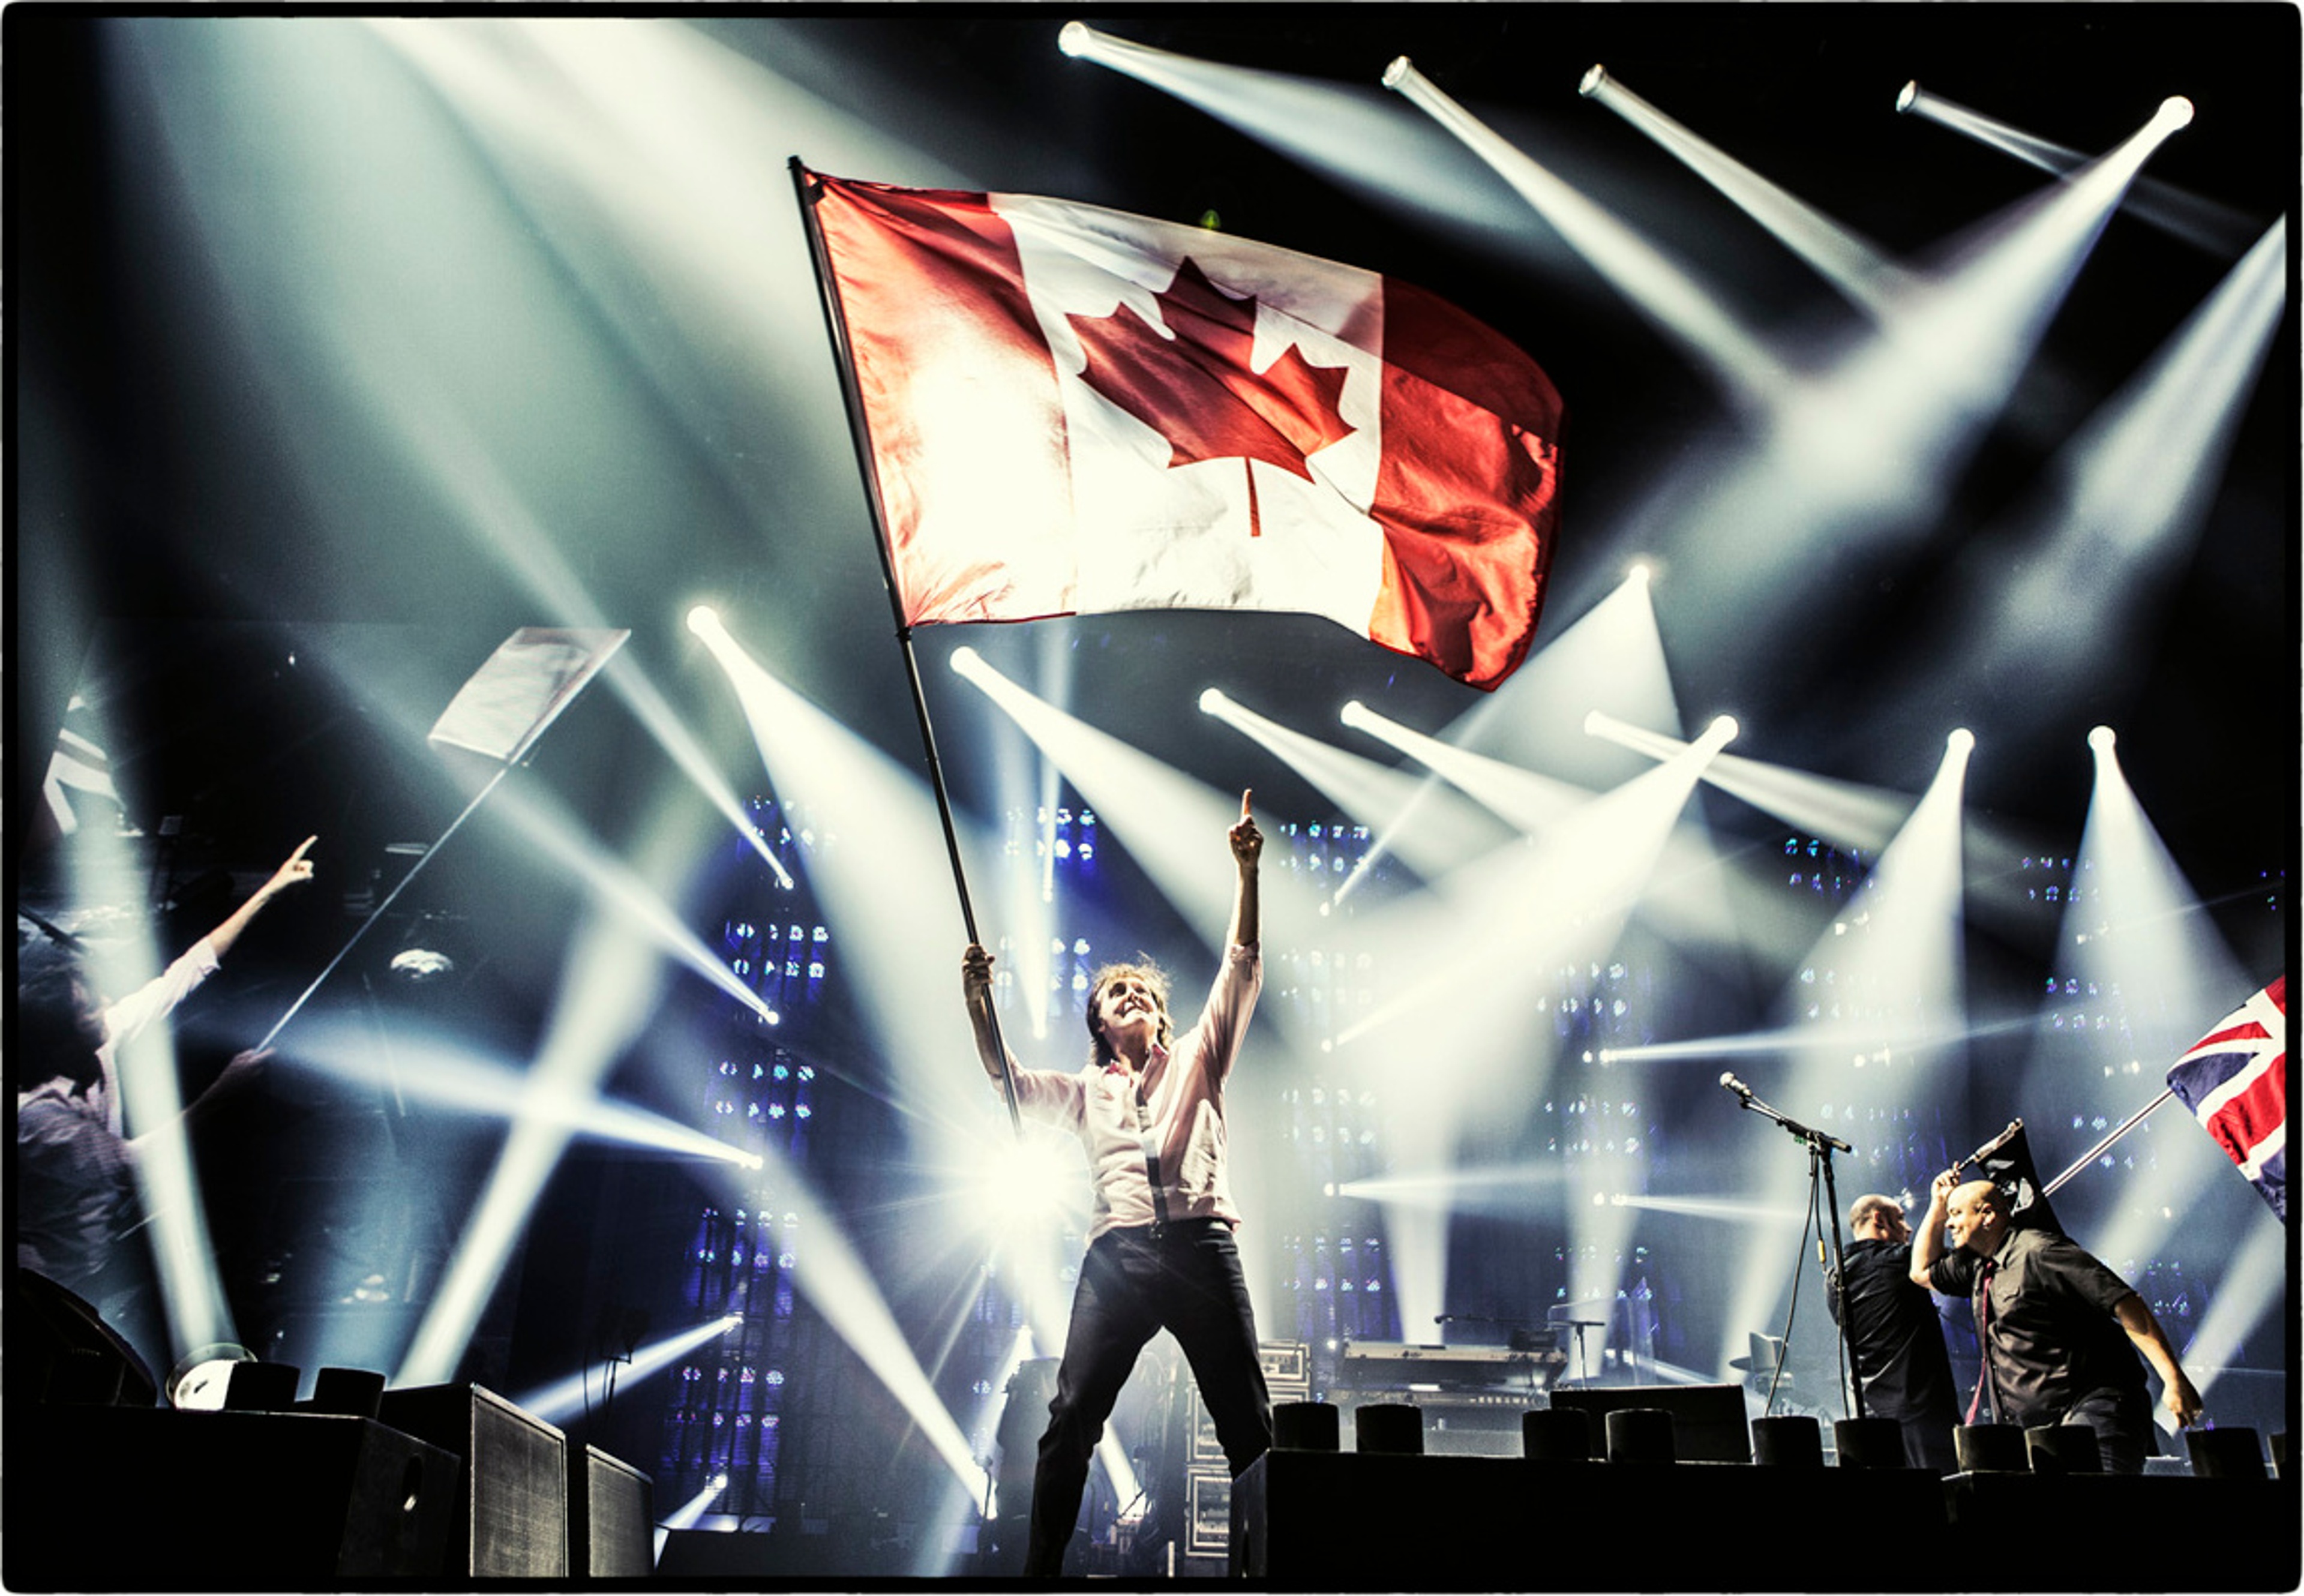 Paul waving the Canadian flag on stage, Scotiabank Place, Ottawa, 13th June 2013